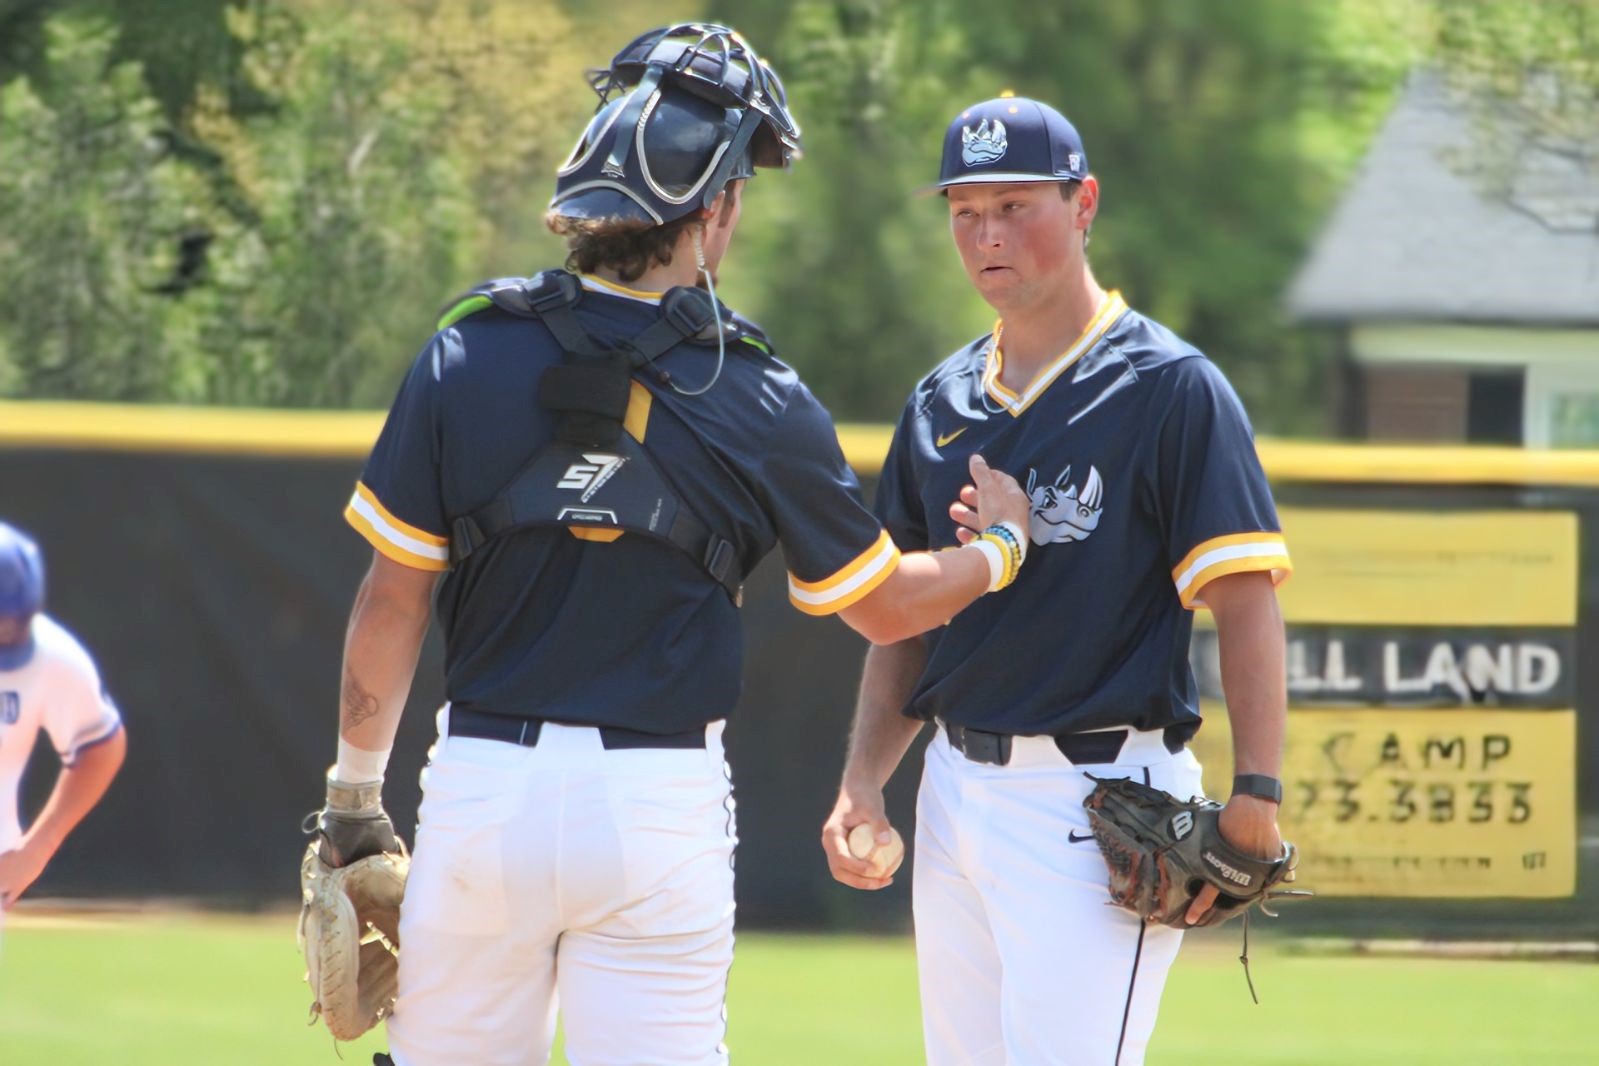 Gaston College catcher Seth Christmas (left) discusses strategy with pitcher Landon Carr during last Sunday's Rhinos victory at Cleveland Community College.